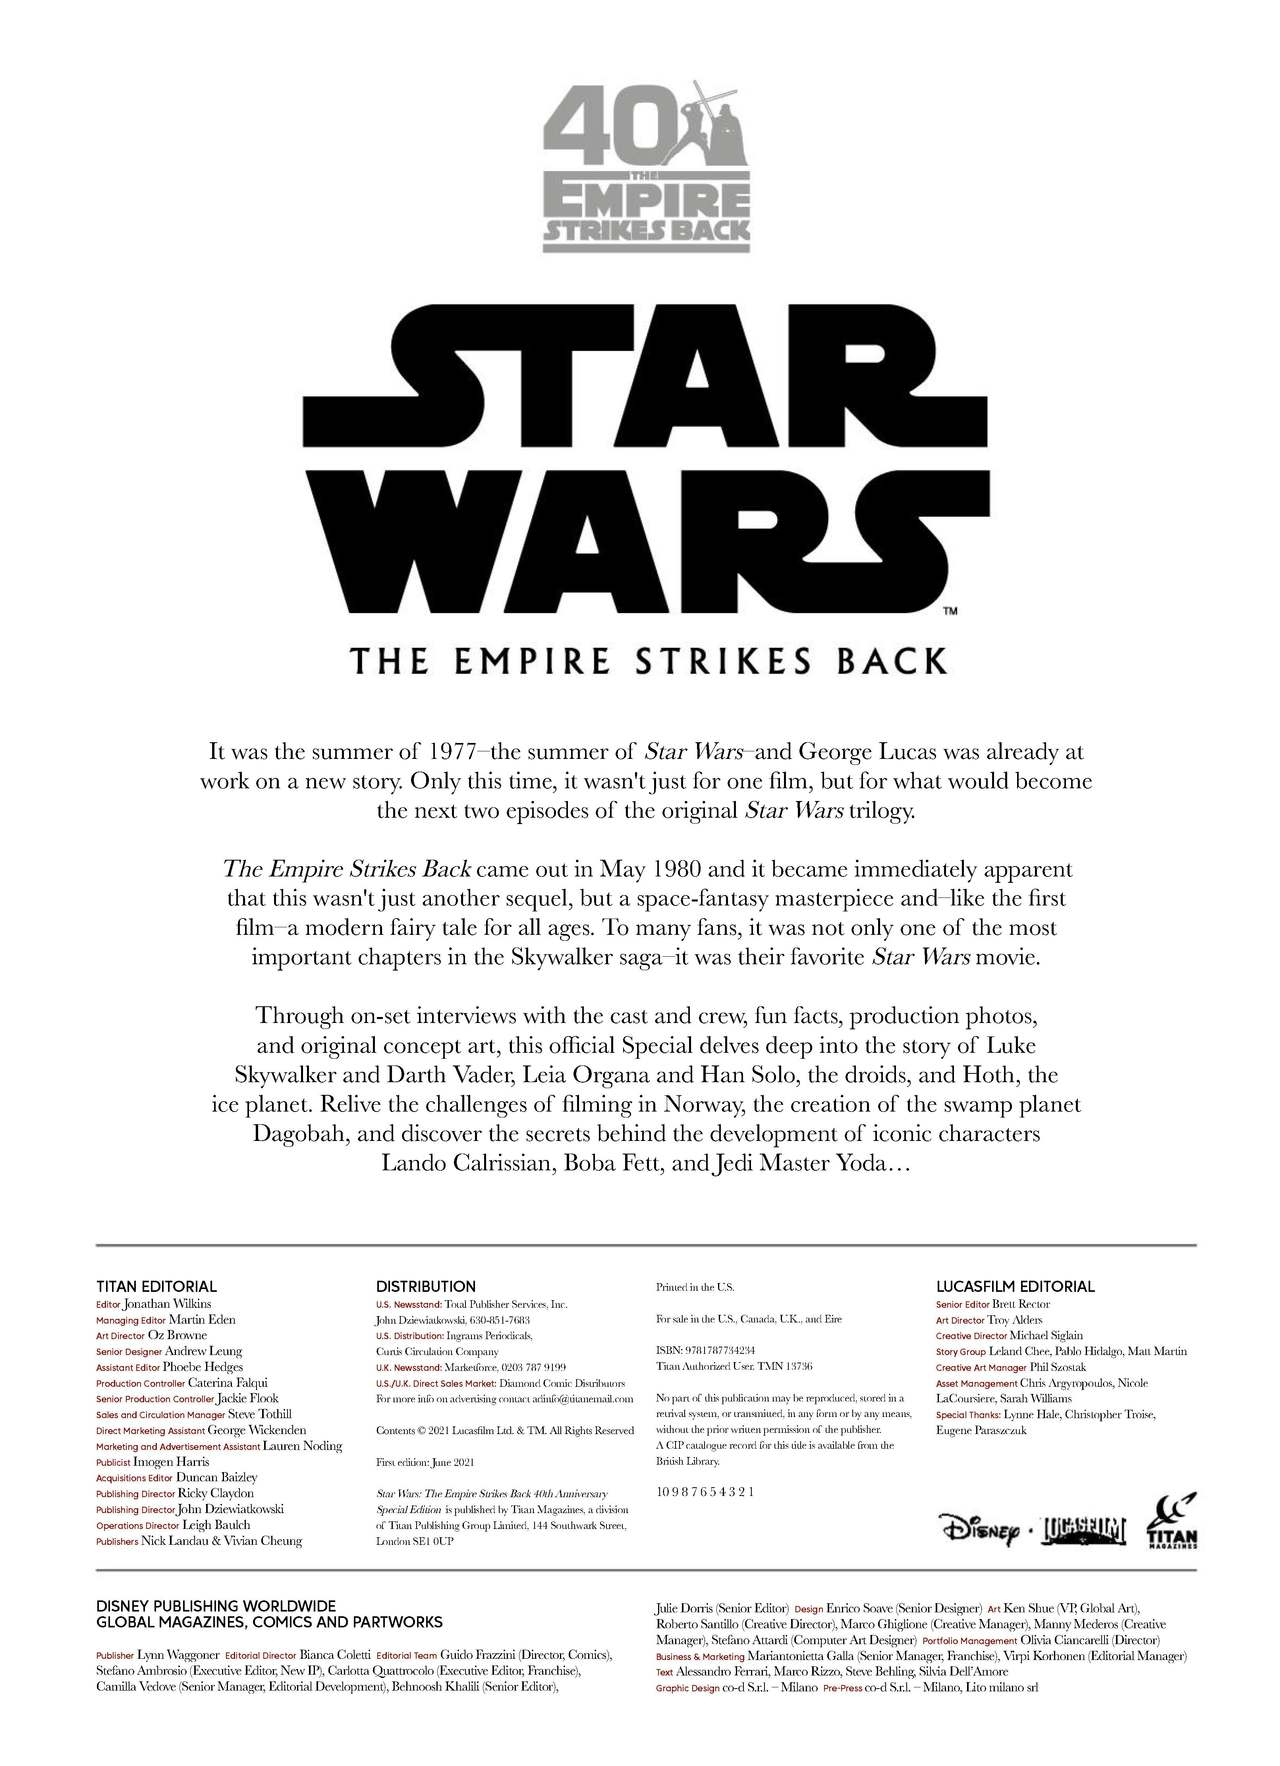 Star Wars - The Empire Strikes Back - The 40th Anniversary Special Edition 2